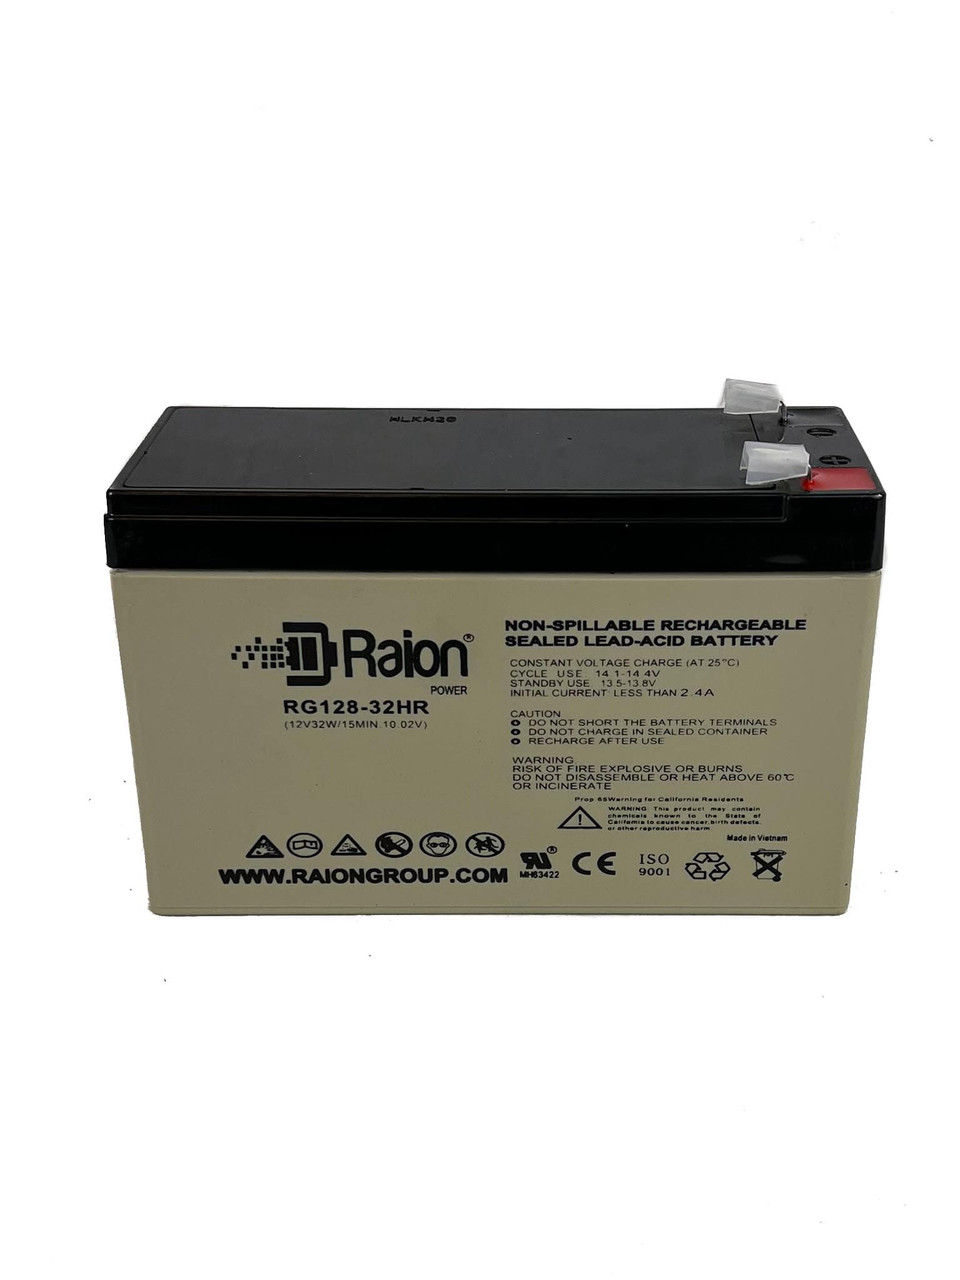 Raion Power RG128-32HR Replacement High Rate Battery Cartridge for Minuteman 600